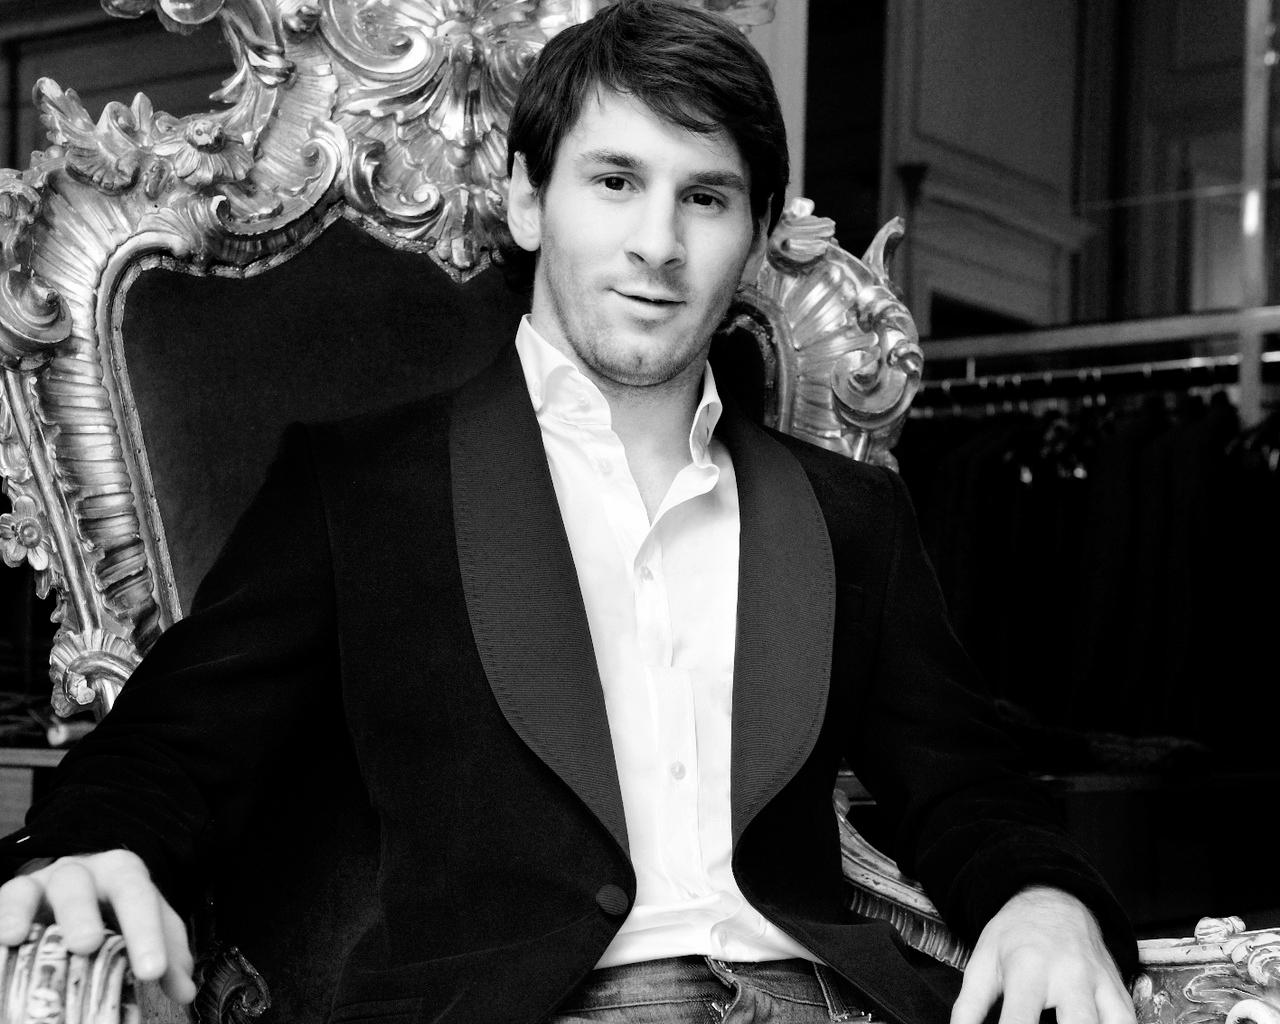 Argentine Soccer Football Star Lionel Messi…sexiest Man Of The Day Raannt